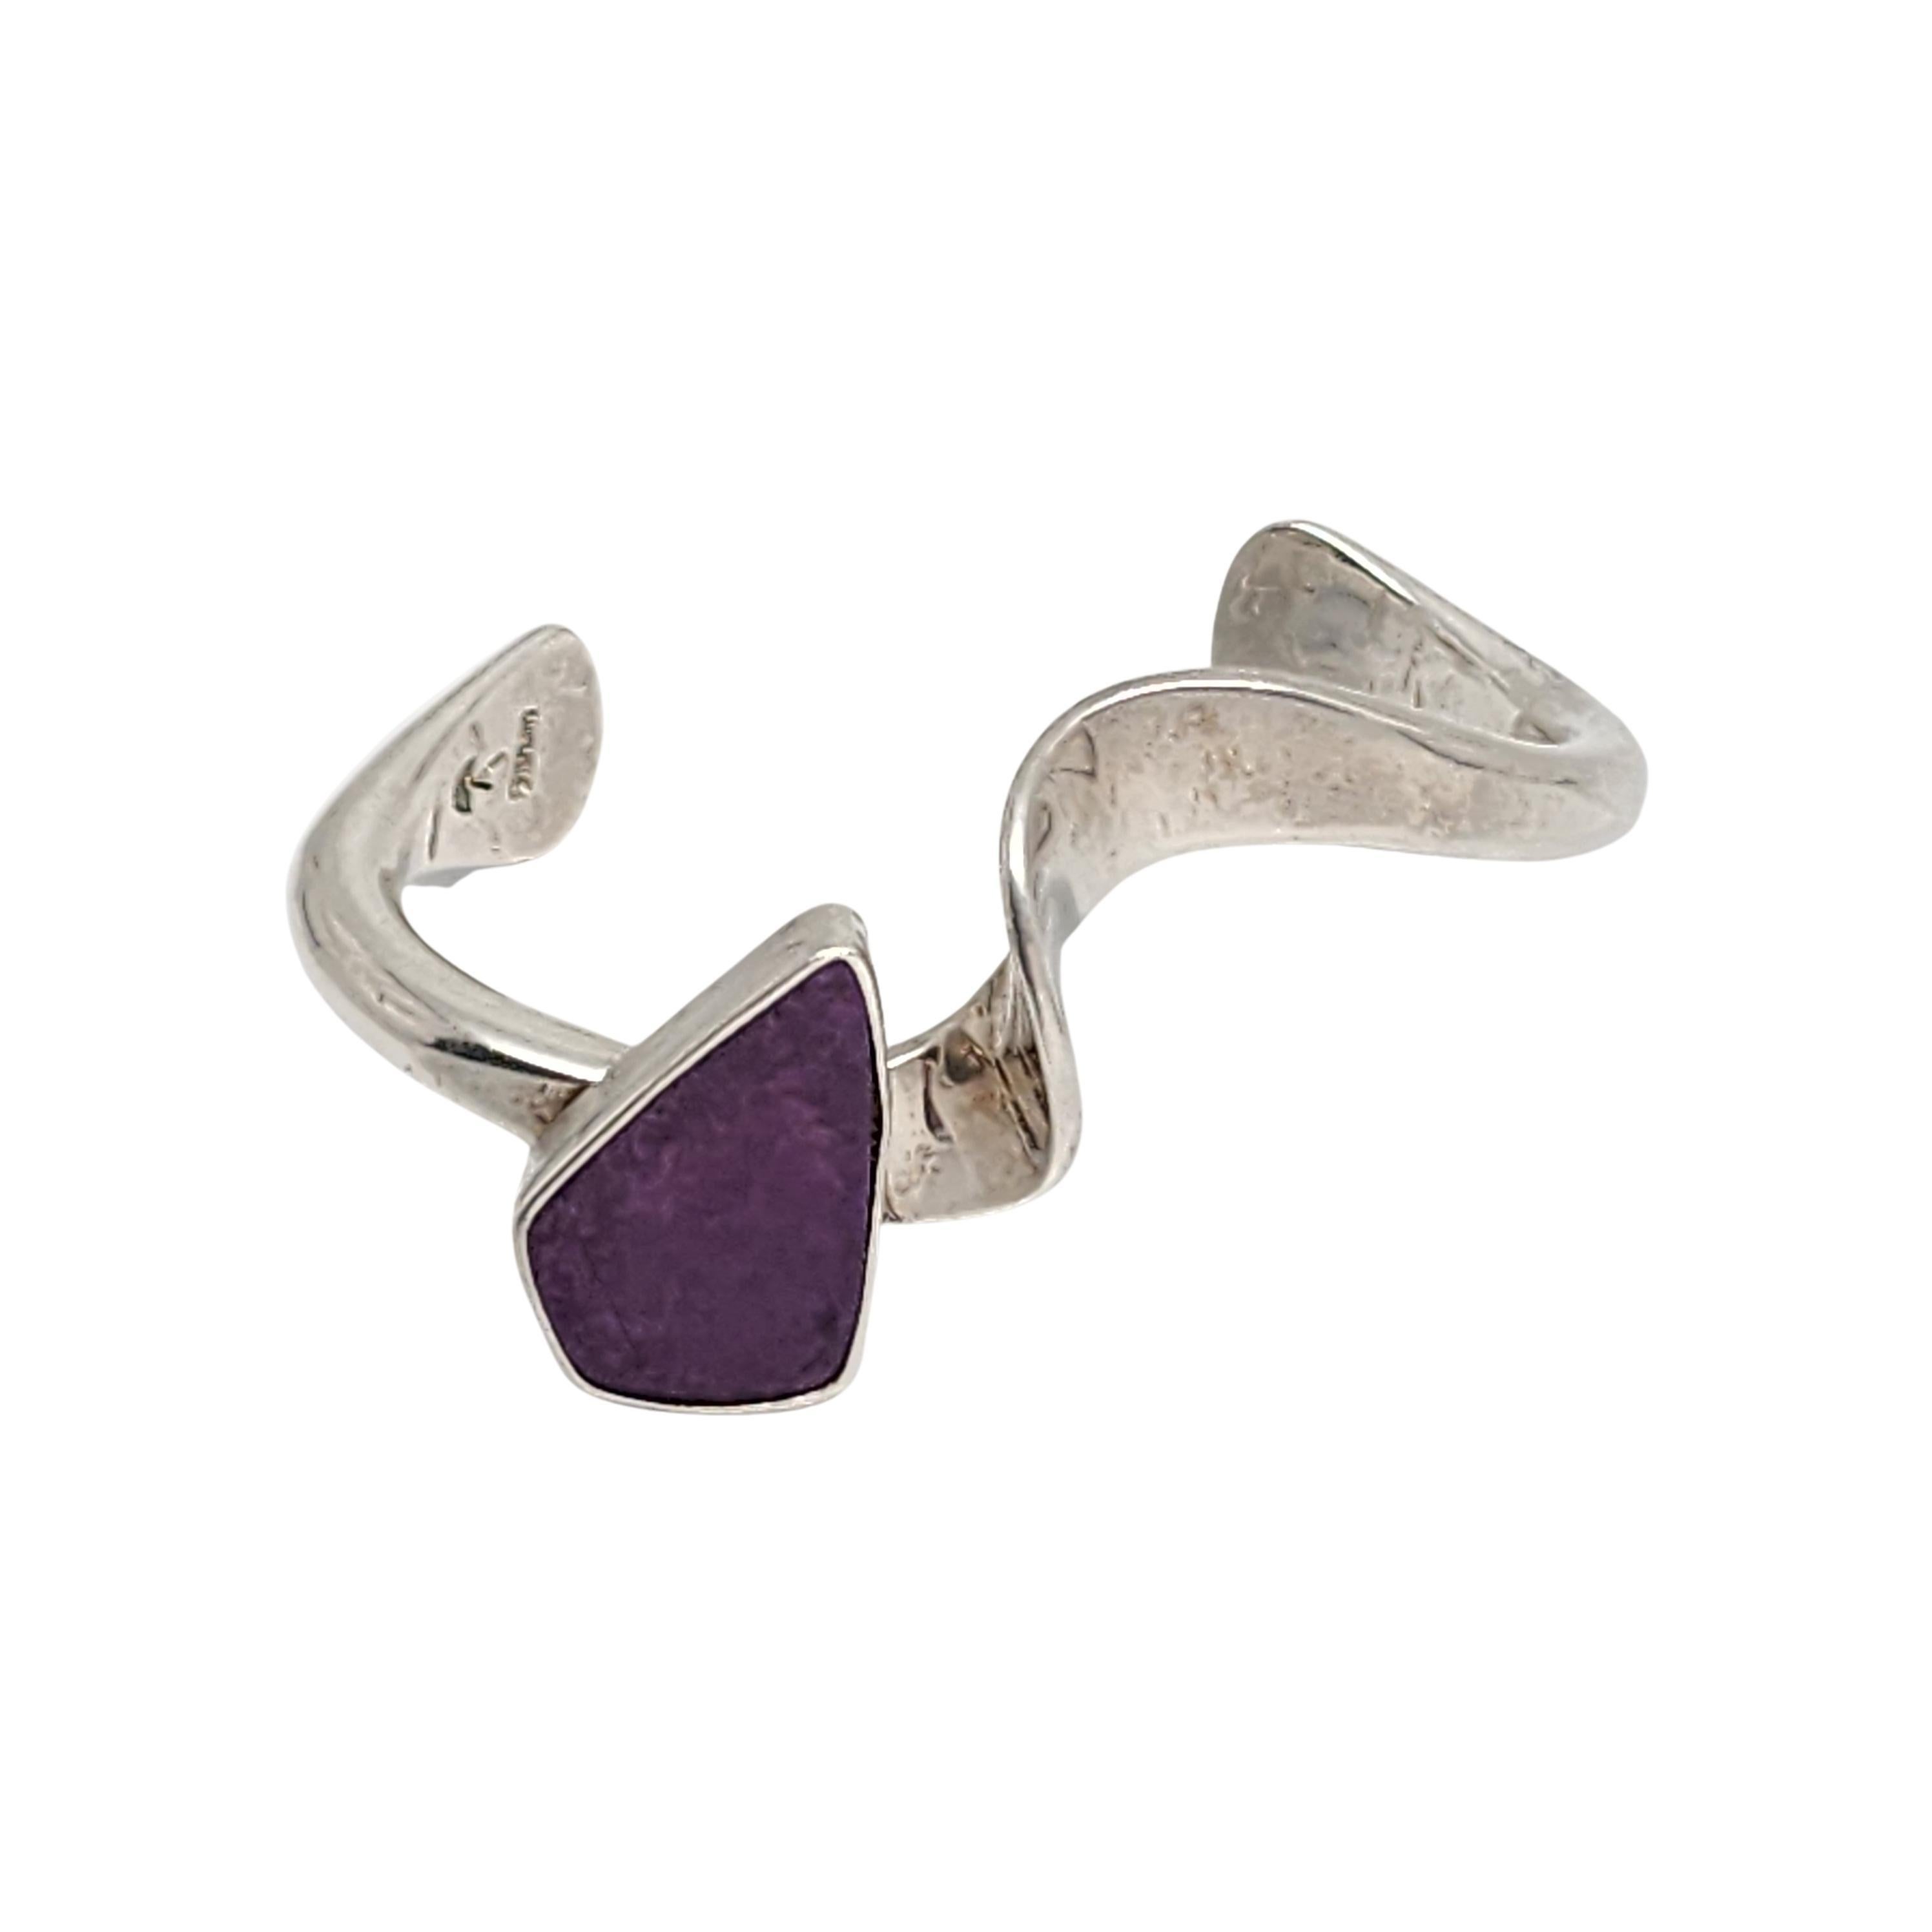 Sterling silver sugilite cuff bracelet by Native American artisan Richard Aguilar.

Unique twist design featuring a large purple sugilite stone by Santo Domingo Pueblo artisan Richard Aguilar. 

Measures approx 5 1/4